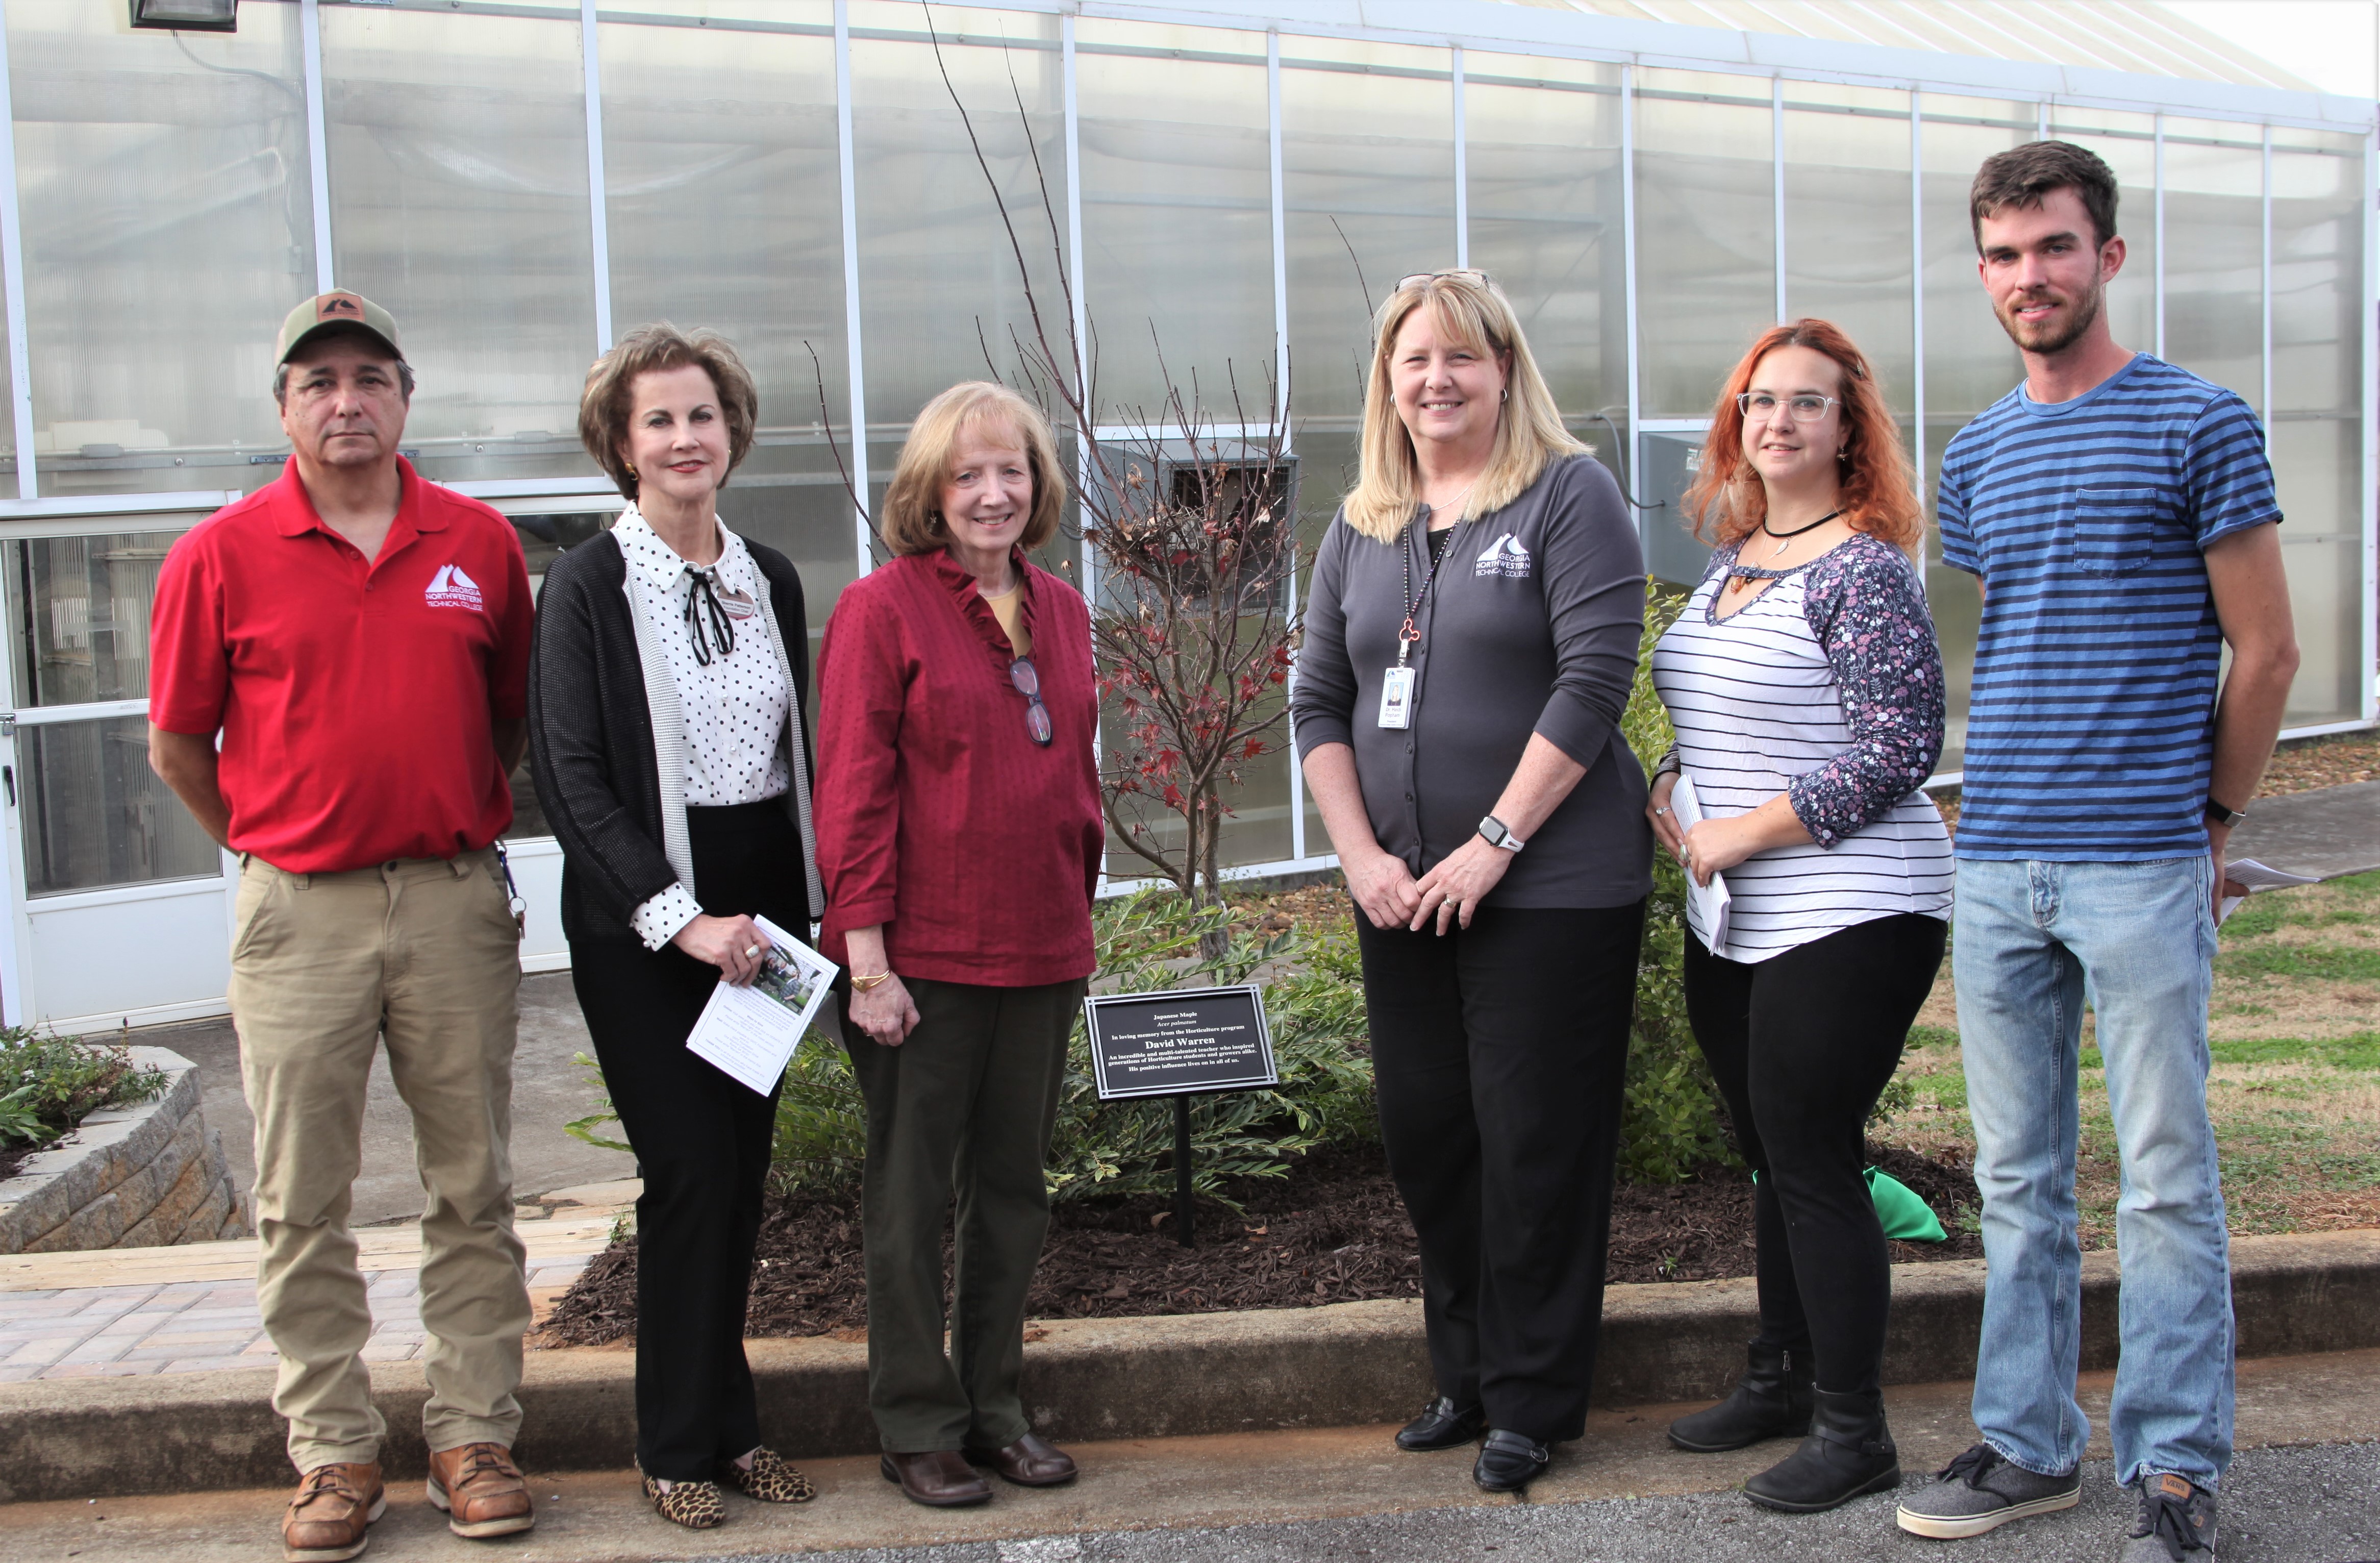 (From left to right) Nick Barton, director of GNTC’s Horticulture program; Sherrie Patterson, chair of the GNTC Foundation Board of Trustees; Dianne Warren; Dr. Heidi Popham, president of GNTC and GNTC Horticulture alumni, Alice Towe and Brandon Williams gather around the David Warren Memorial Tree located in front of the greenhouses of GNTC’s Floyd County Campus during the David Warren Tree Dedication and Scholarship Presentation held on Friday, Dec. 17.